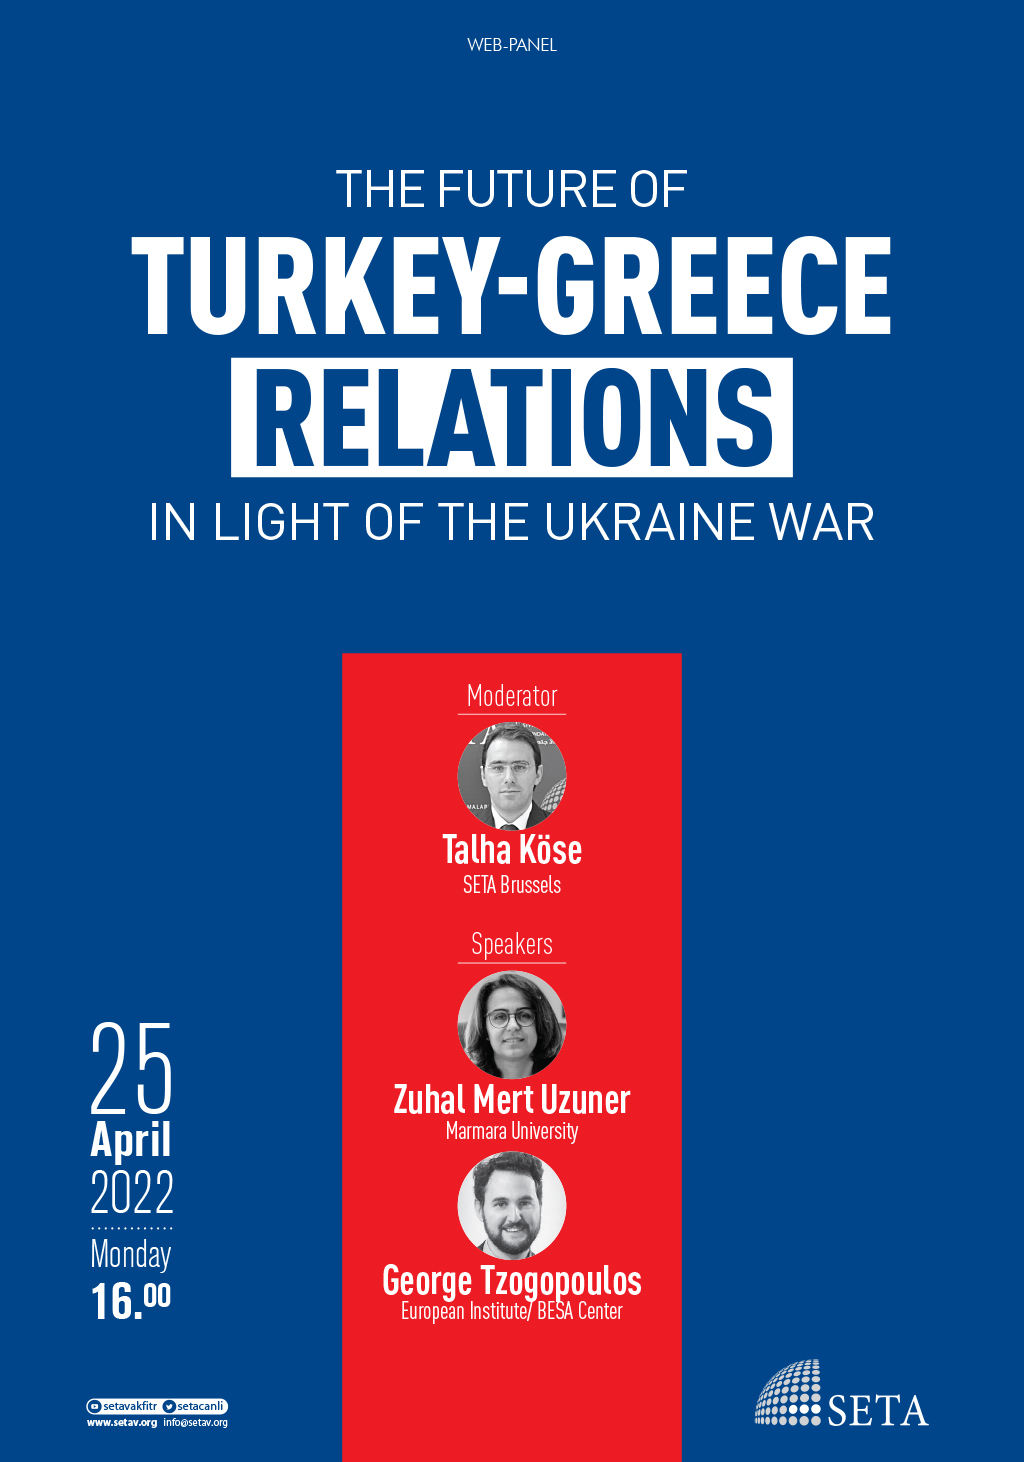 Web Panel: The Future of Turkey-Greece relations in light of the Ukraine War